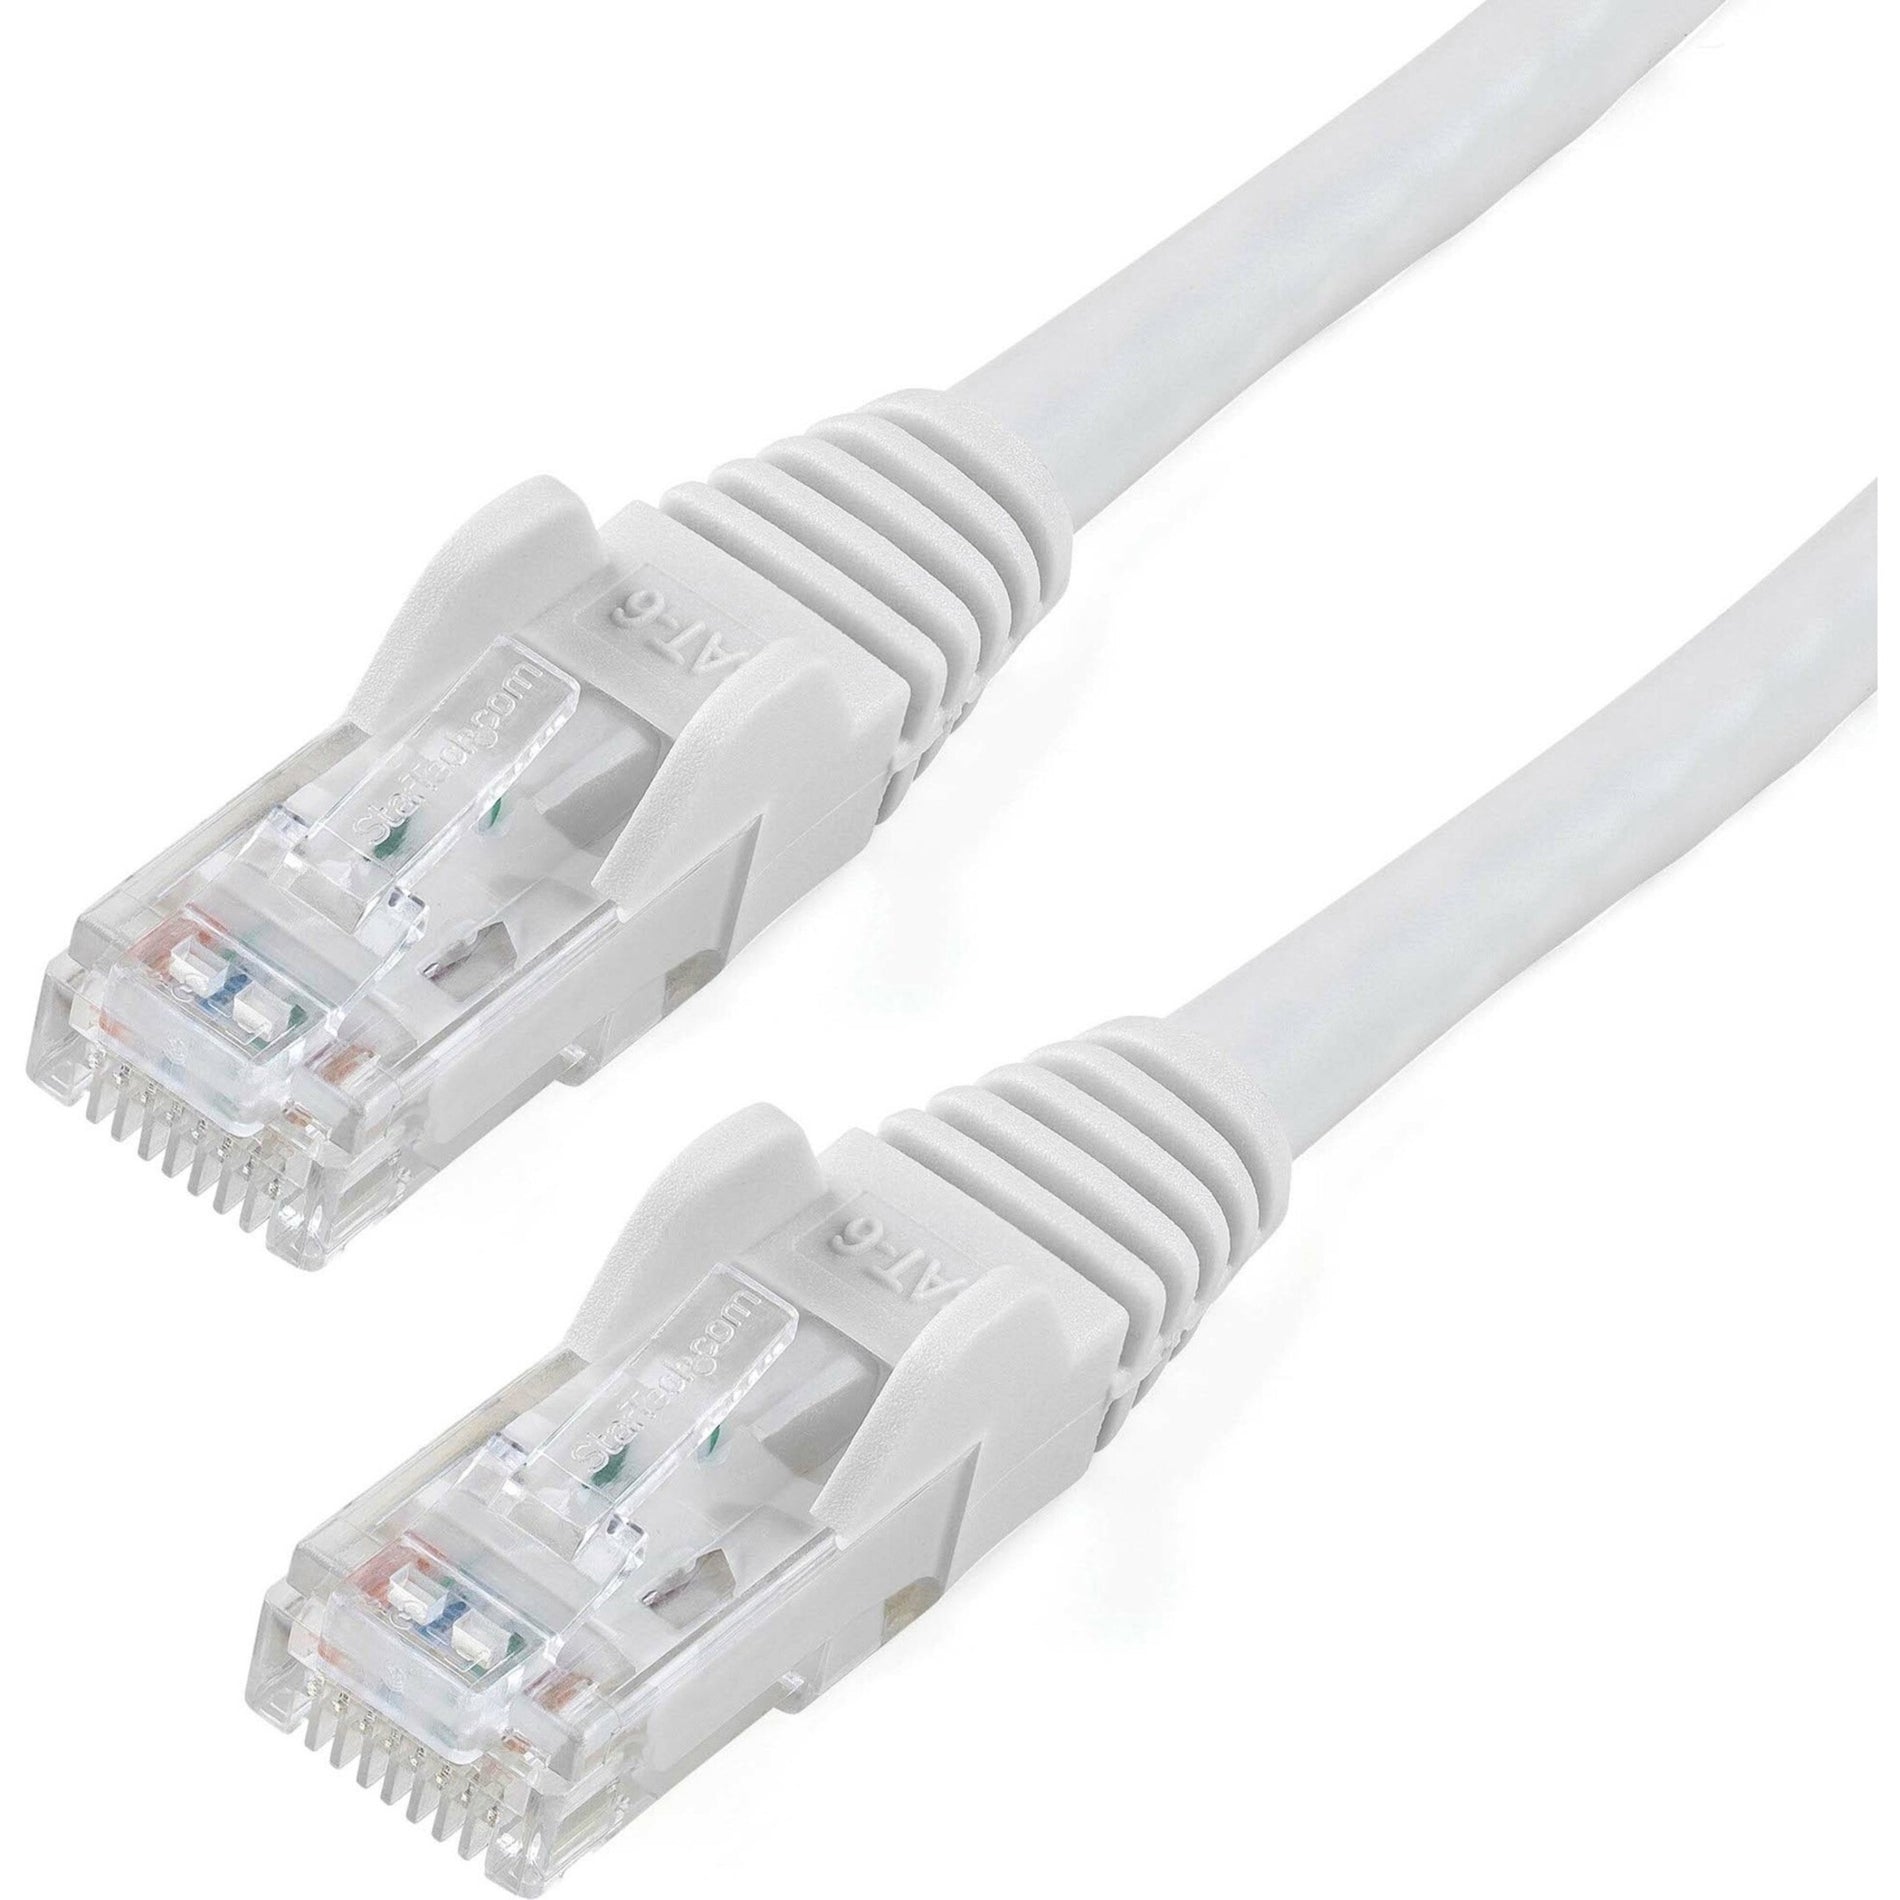 StarTech.com N6PATCH3WH 3 ft White Snagless Cat6 UTP Patch Cable, Lifetime Warranty, 10 Gbit/s Data Transfer Rate, Corrosion Resistant